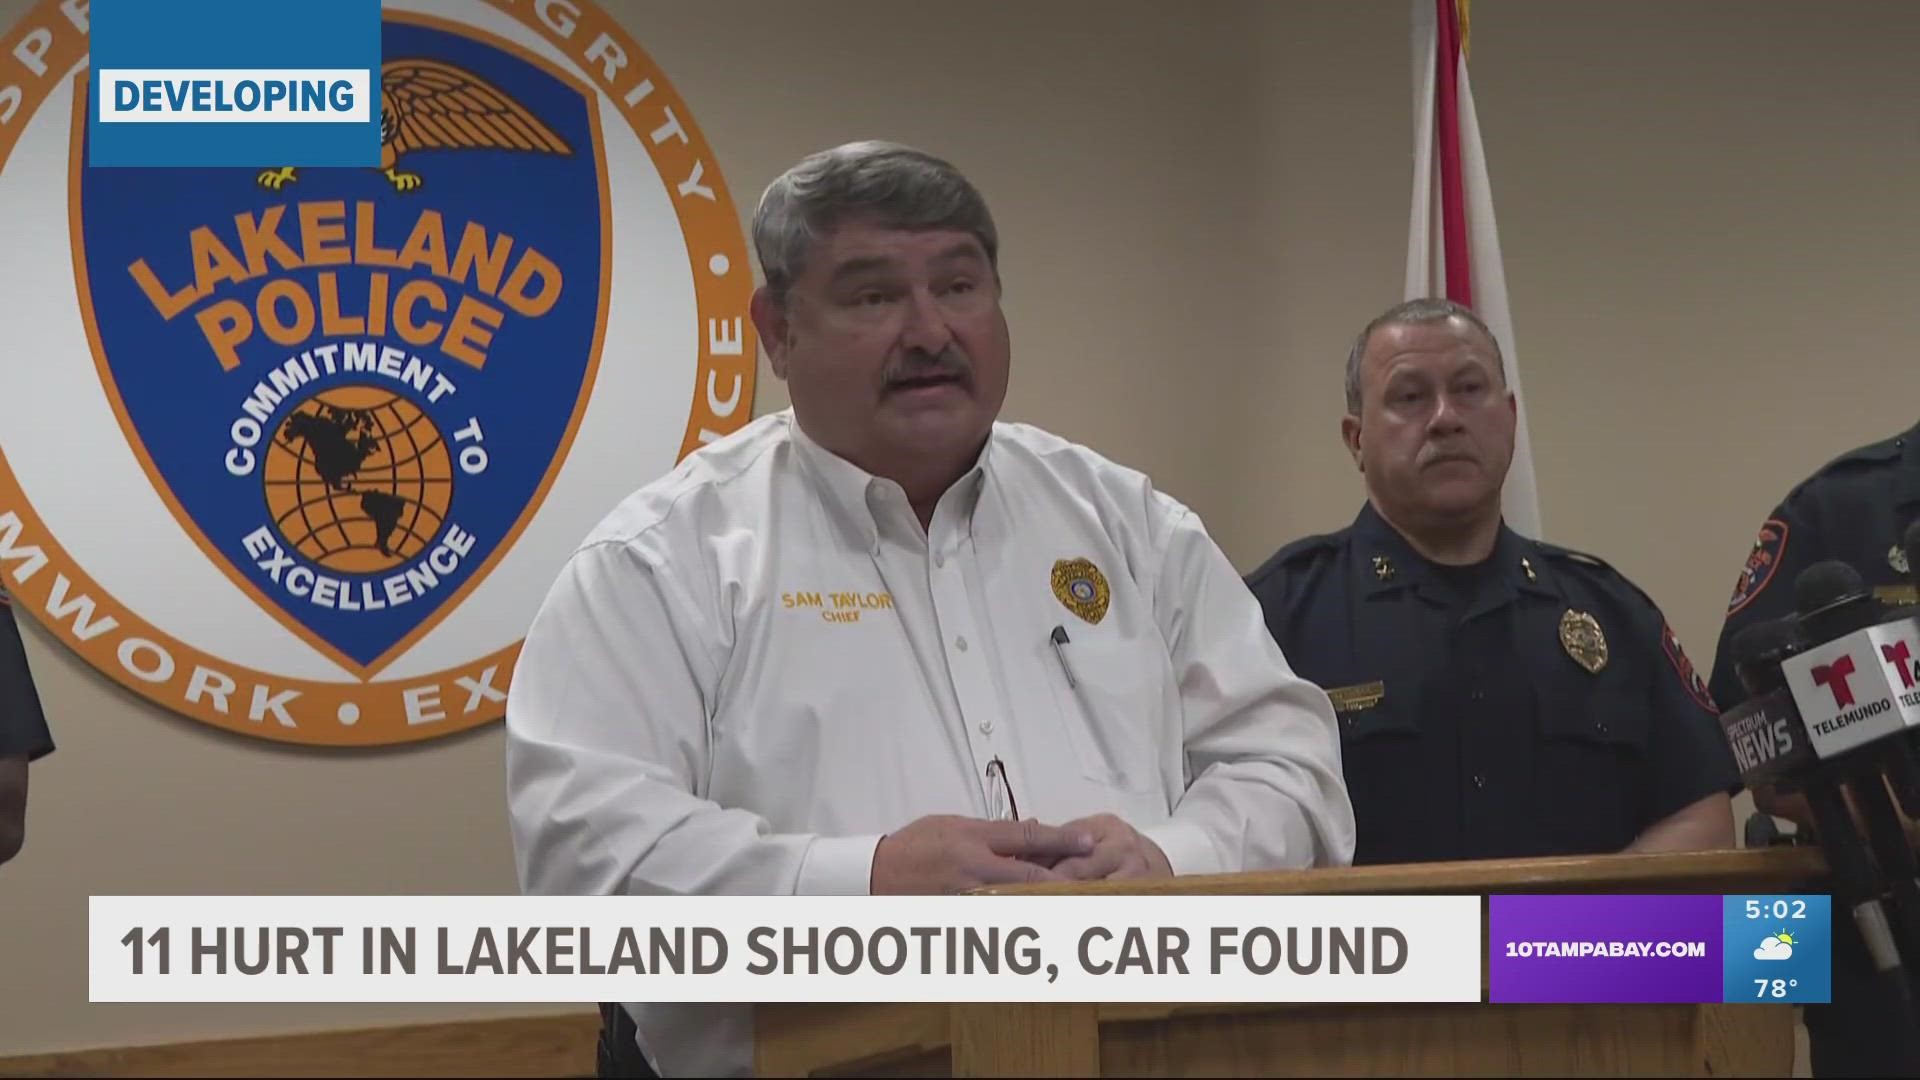 The police chief said his detectives have several strong leads on the suspected gunmen, but no arrests have been made.